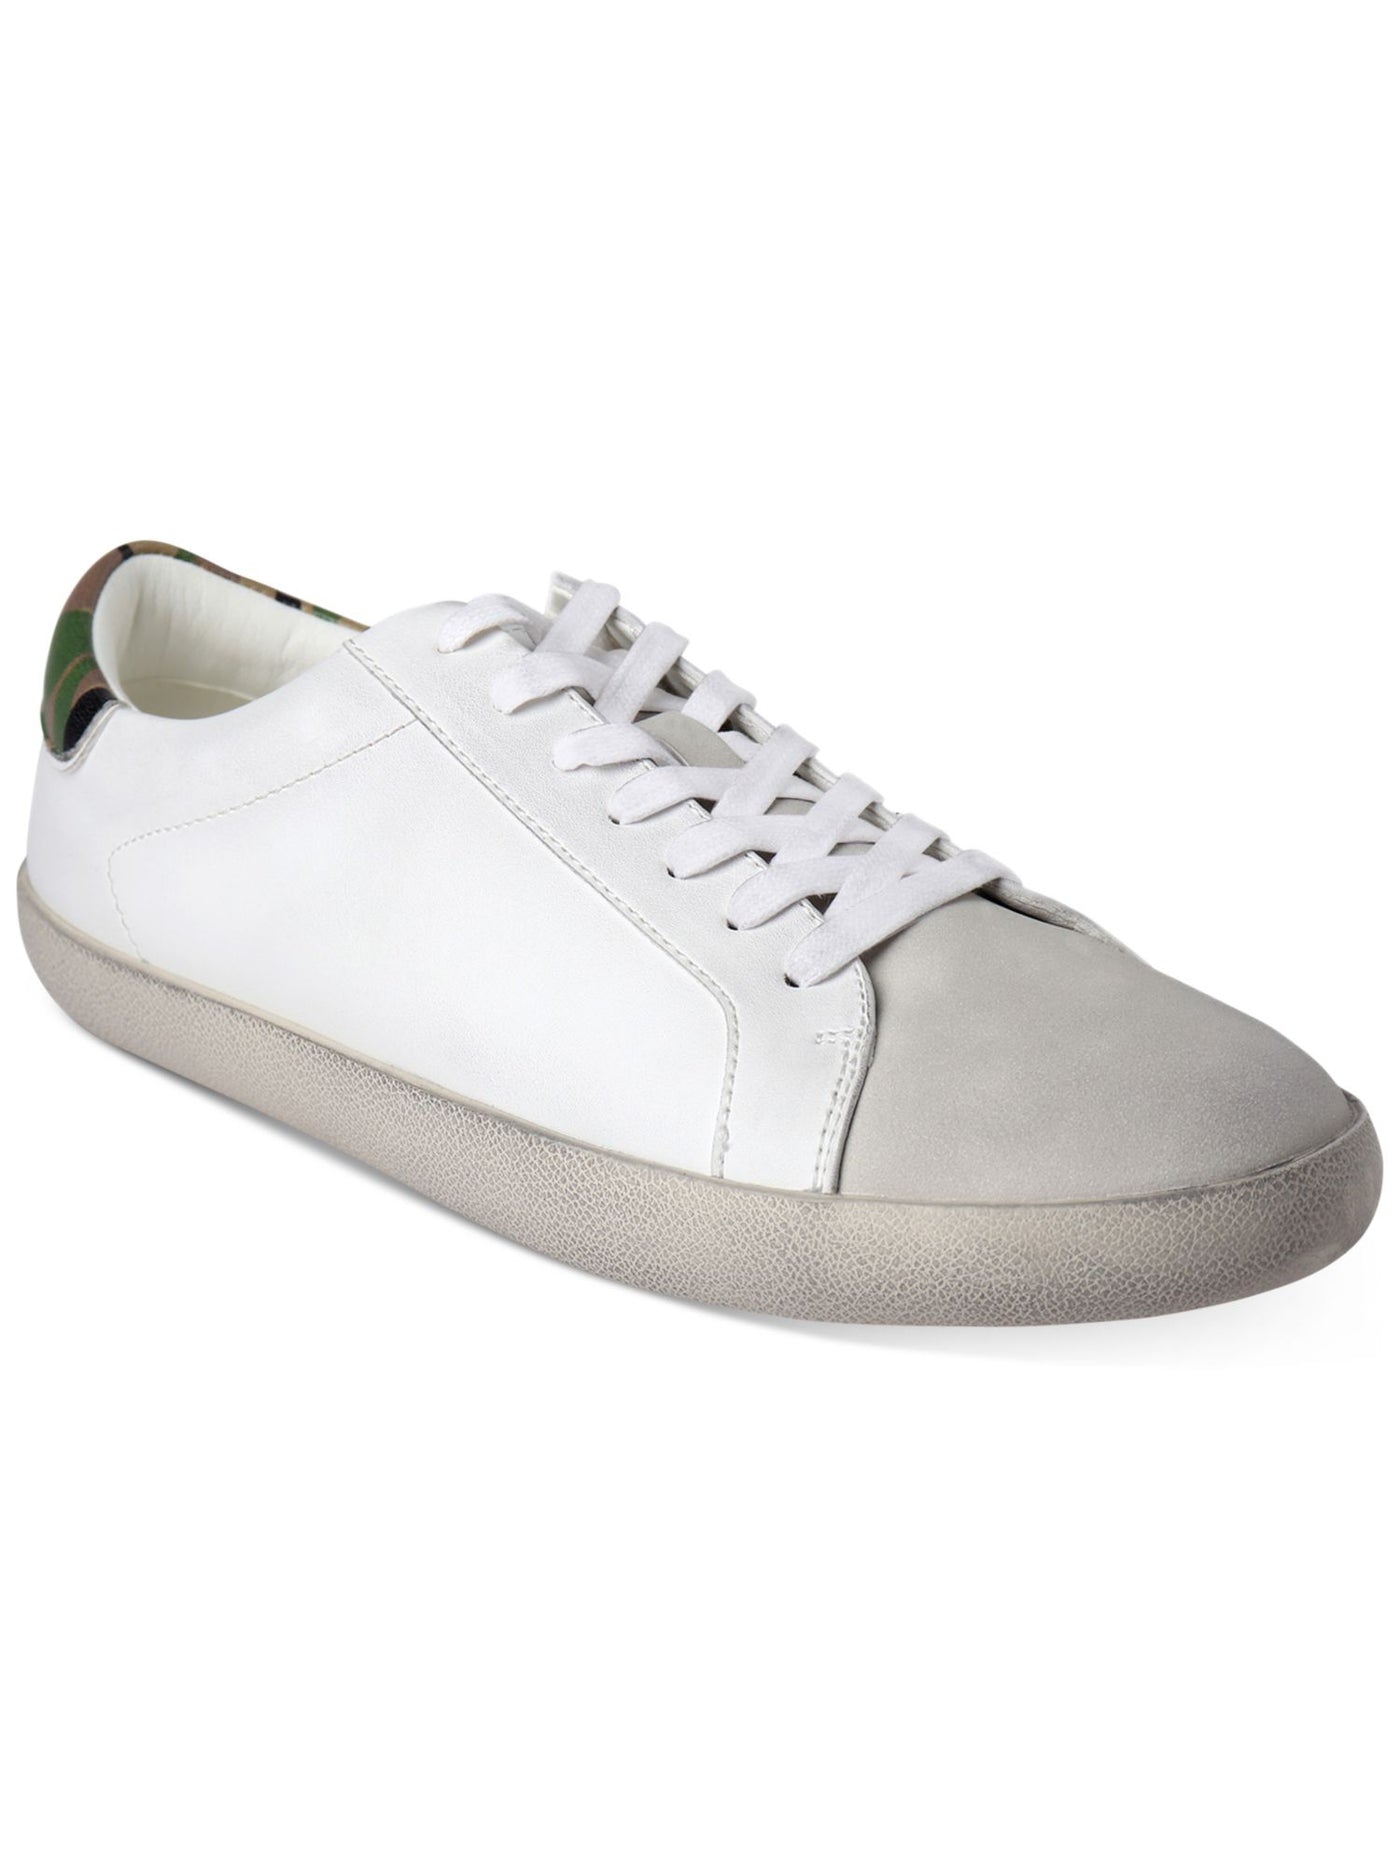 INC Mens White Mixed Media Padded Damon Round Toe Lace-Up Sneakers Shoes 11 M